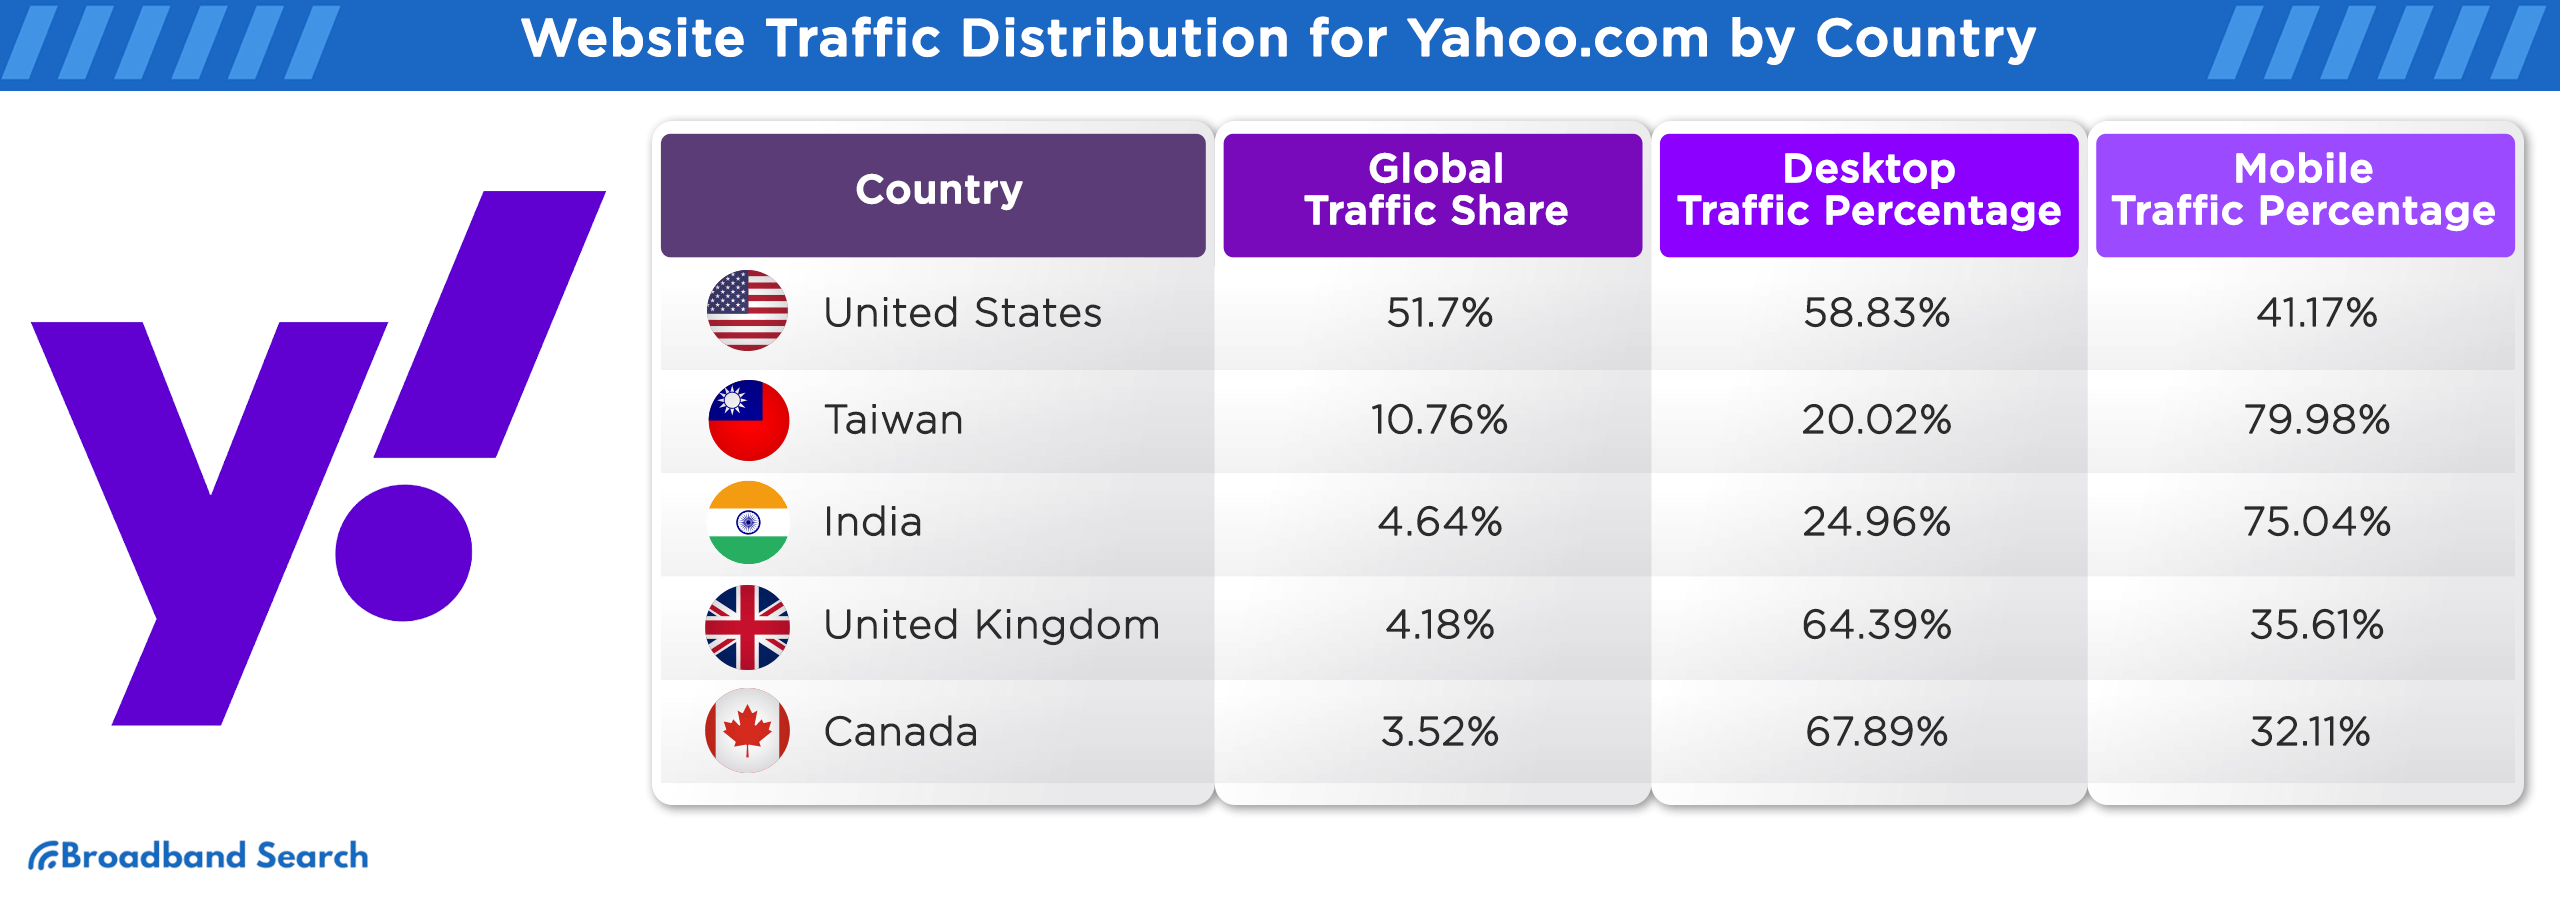 Website traffic distribution for yahoo.com by country